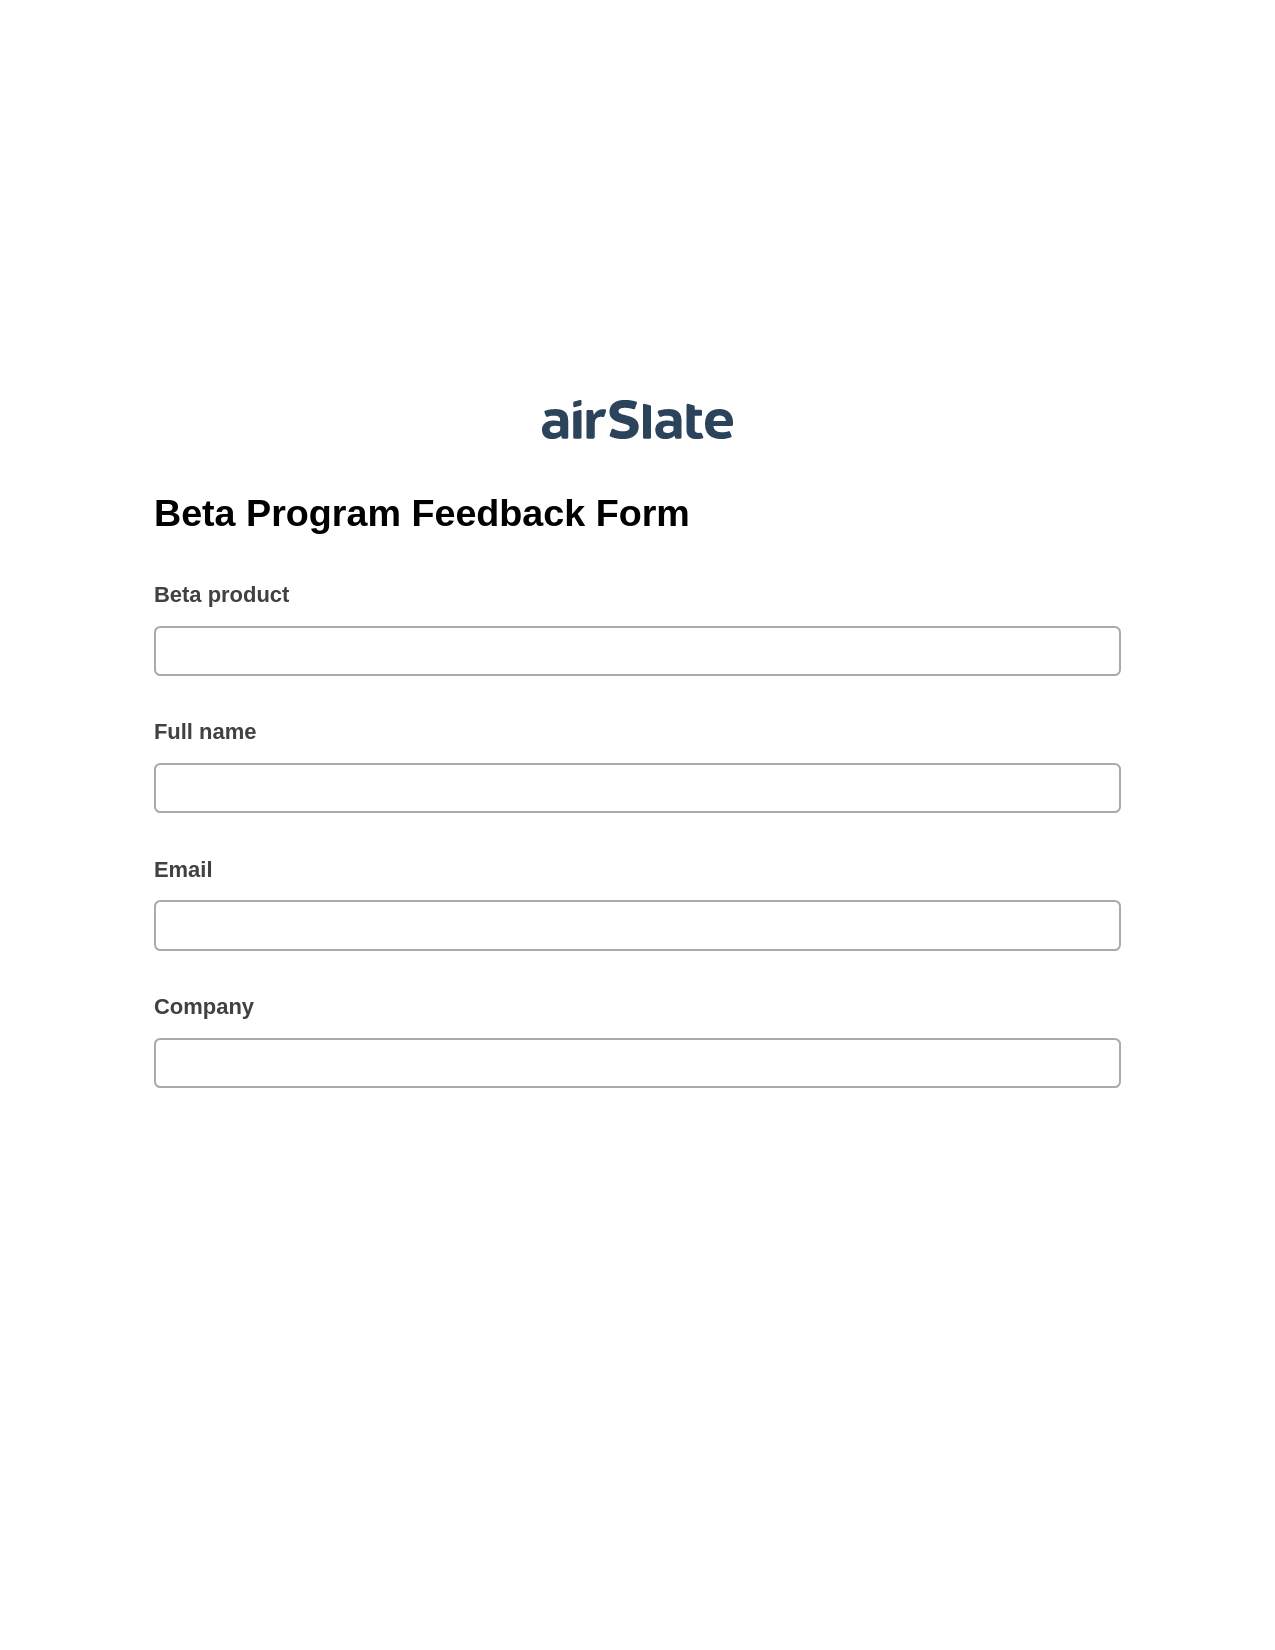 Beta Program Feedback Form Pre-fill from Excel Spreadsheet Bot, Hide Signatures Bot, Export to Excel 365 Bot